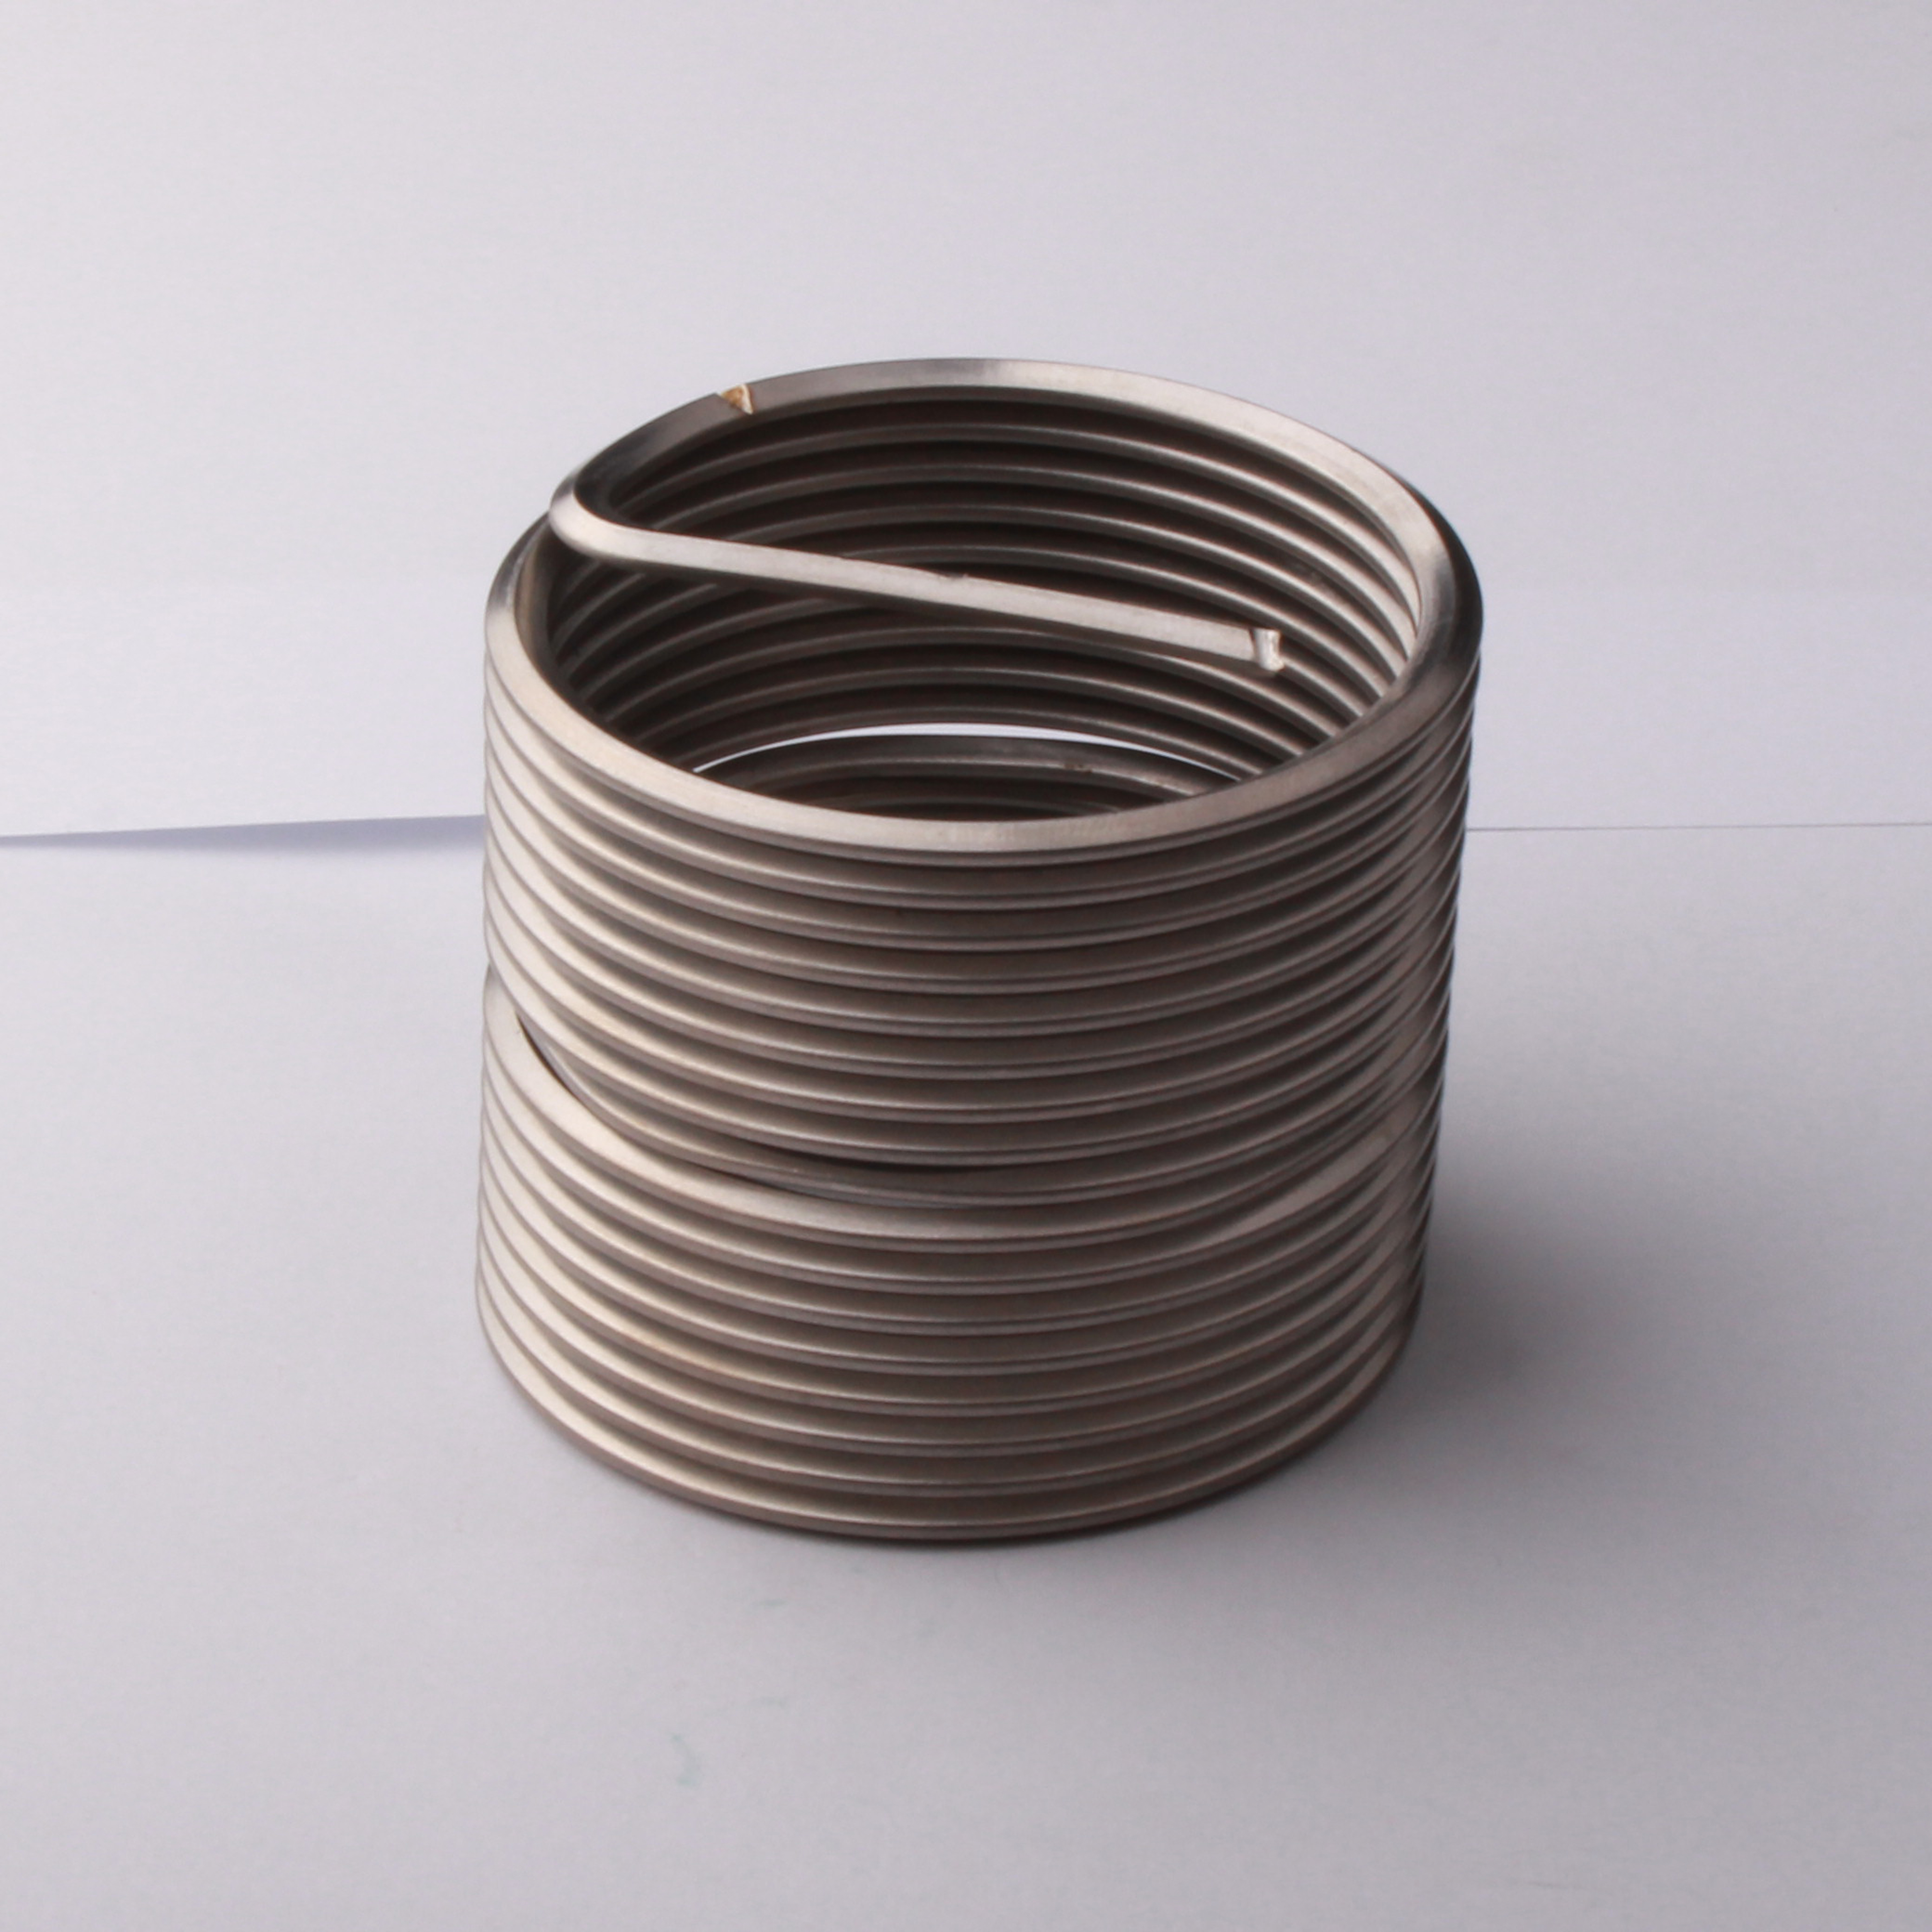 plated wire thread inserts 